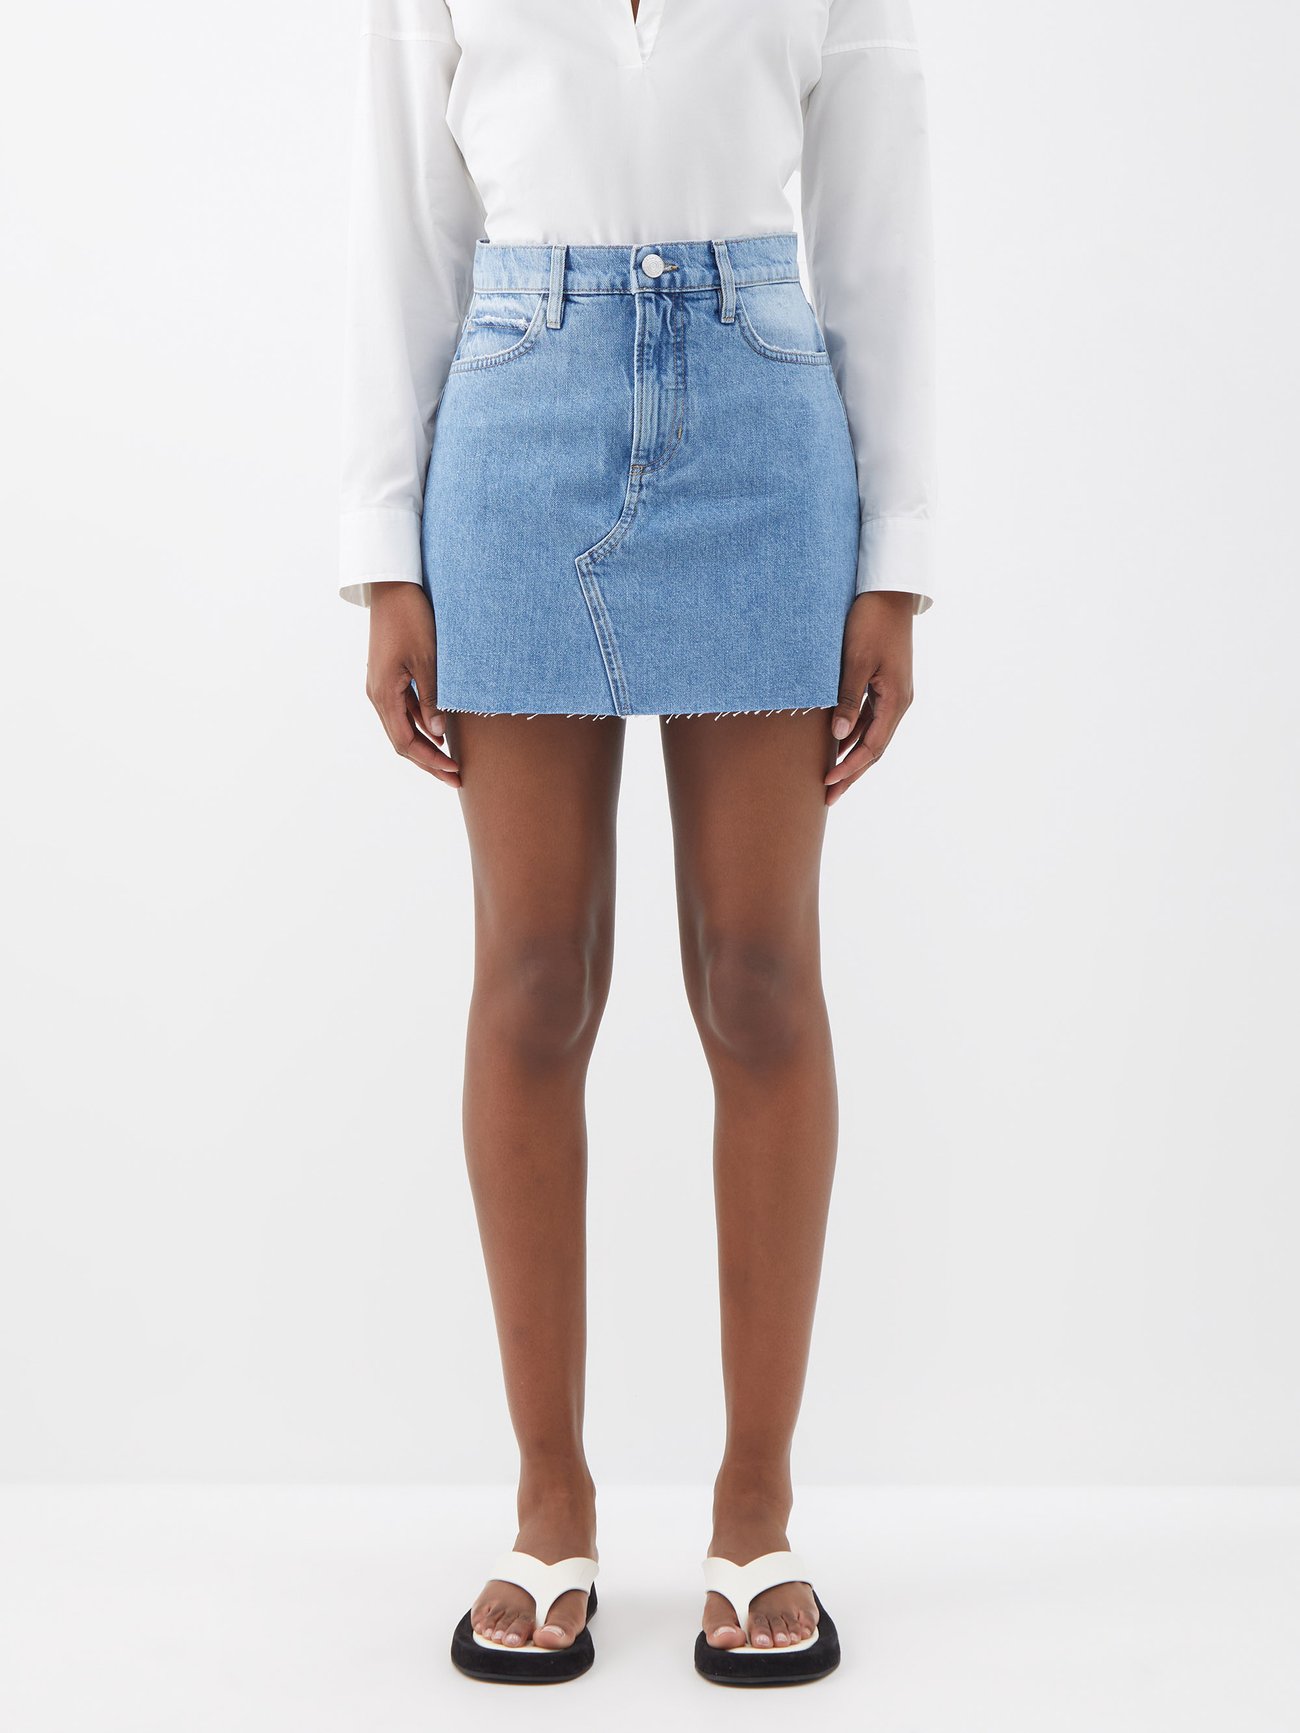 The Best Micro Miniskirts To Try This Summer | Who What Wear UK